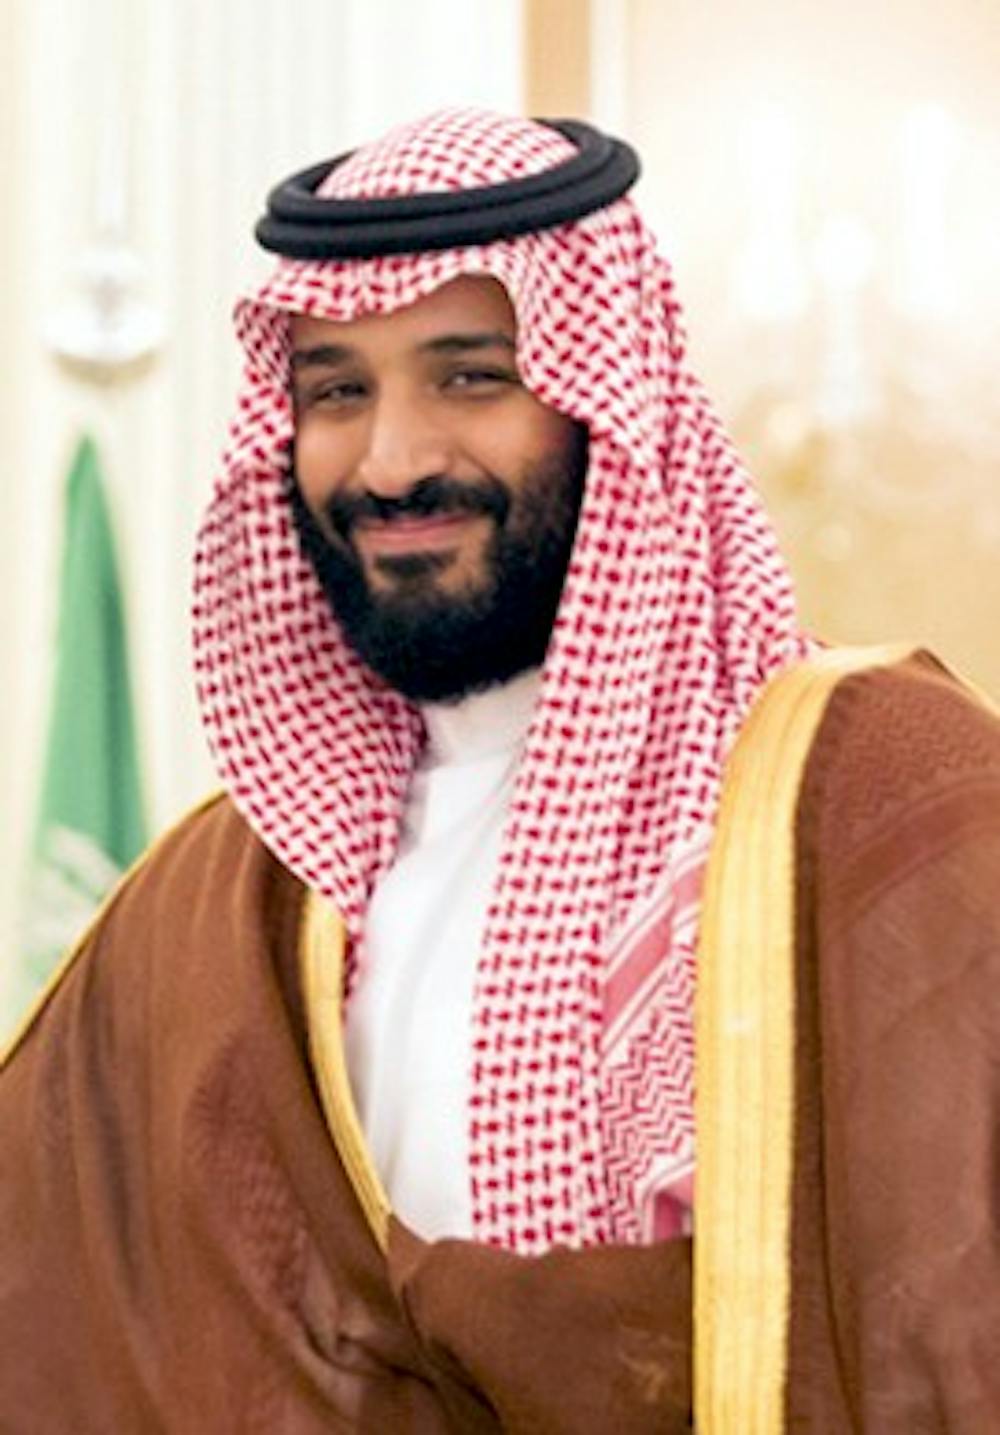 <p>The Crown Prince Mohammad Bin Salman Al Saud has been accused of orchestrating the murder of Jamal Khashoggi, a prominent critic of the Saudi Royal family and of Mohammad Bin Salman in particular.</p>